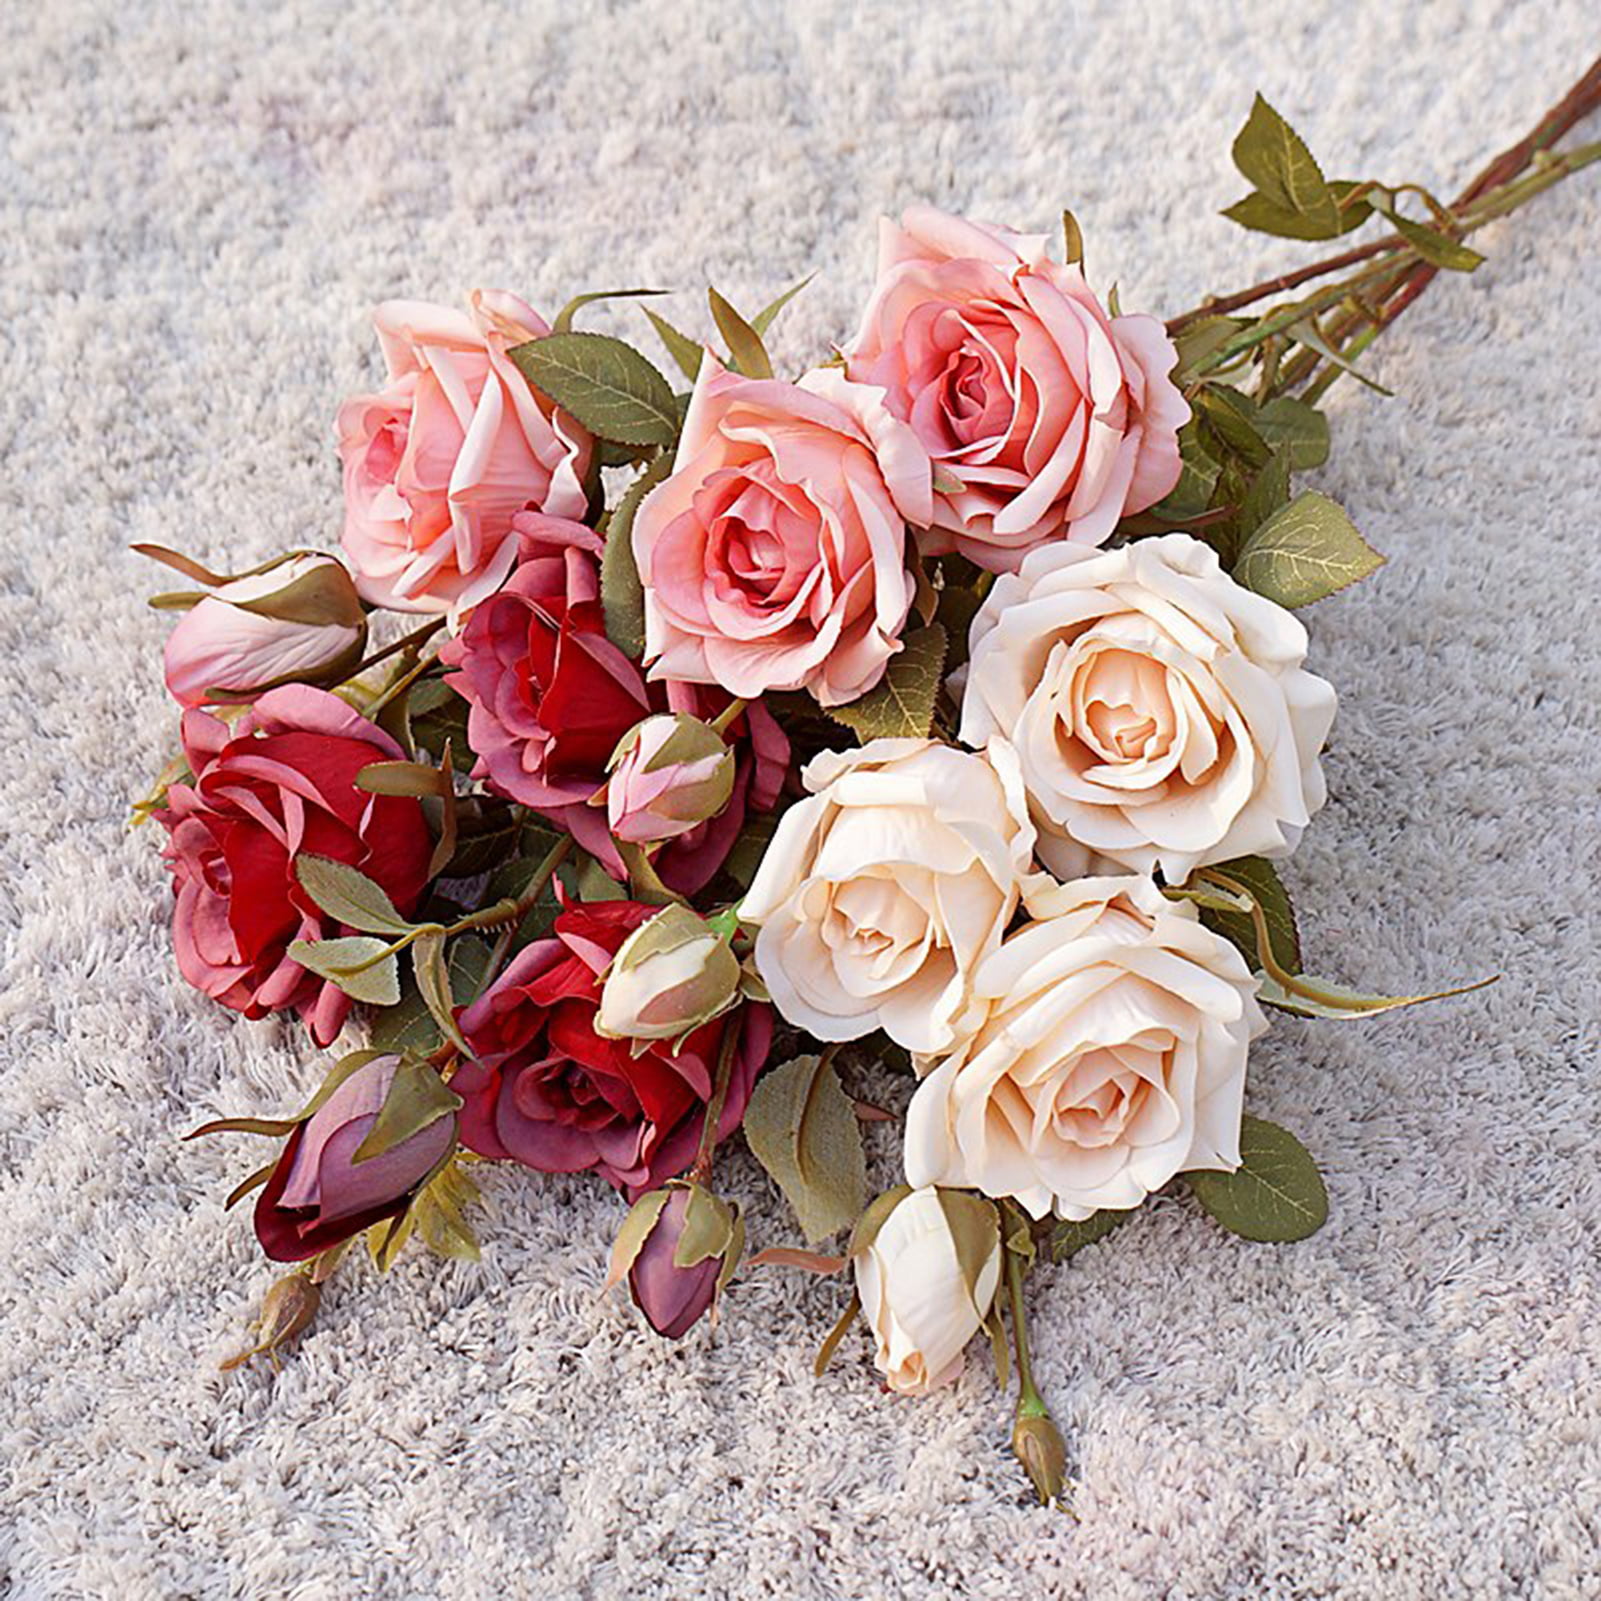 Details about   21HEADS ARTIFICIAL ROSE SMALL SILK FLOWERS BUNCH Wedding Home Outdoor Decor UK 